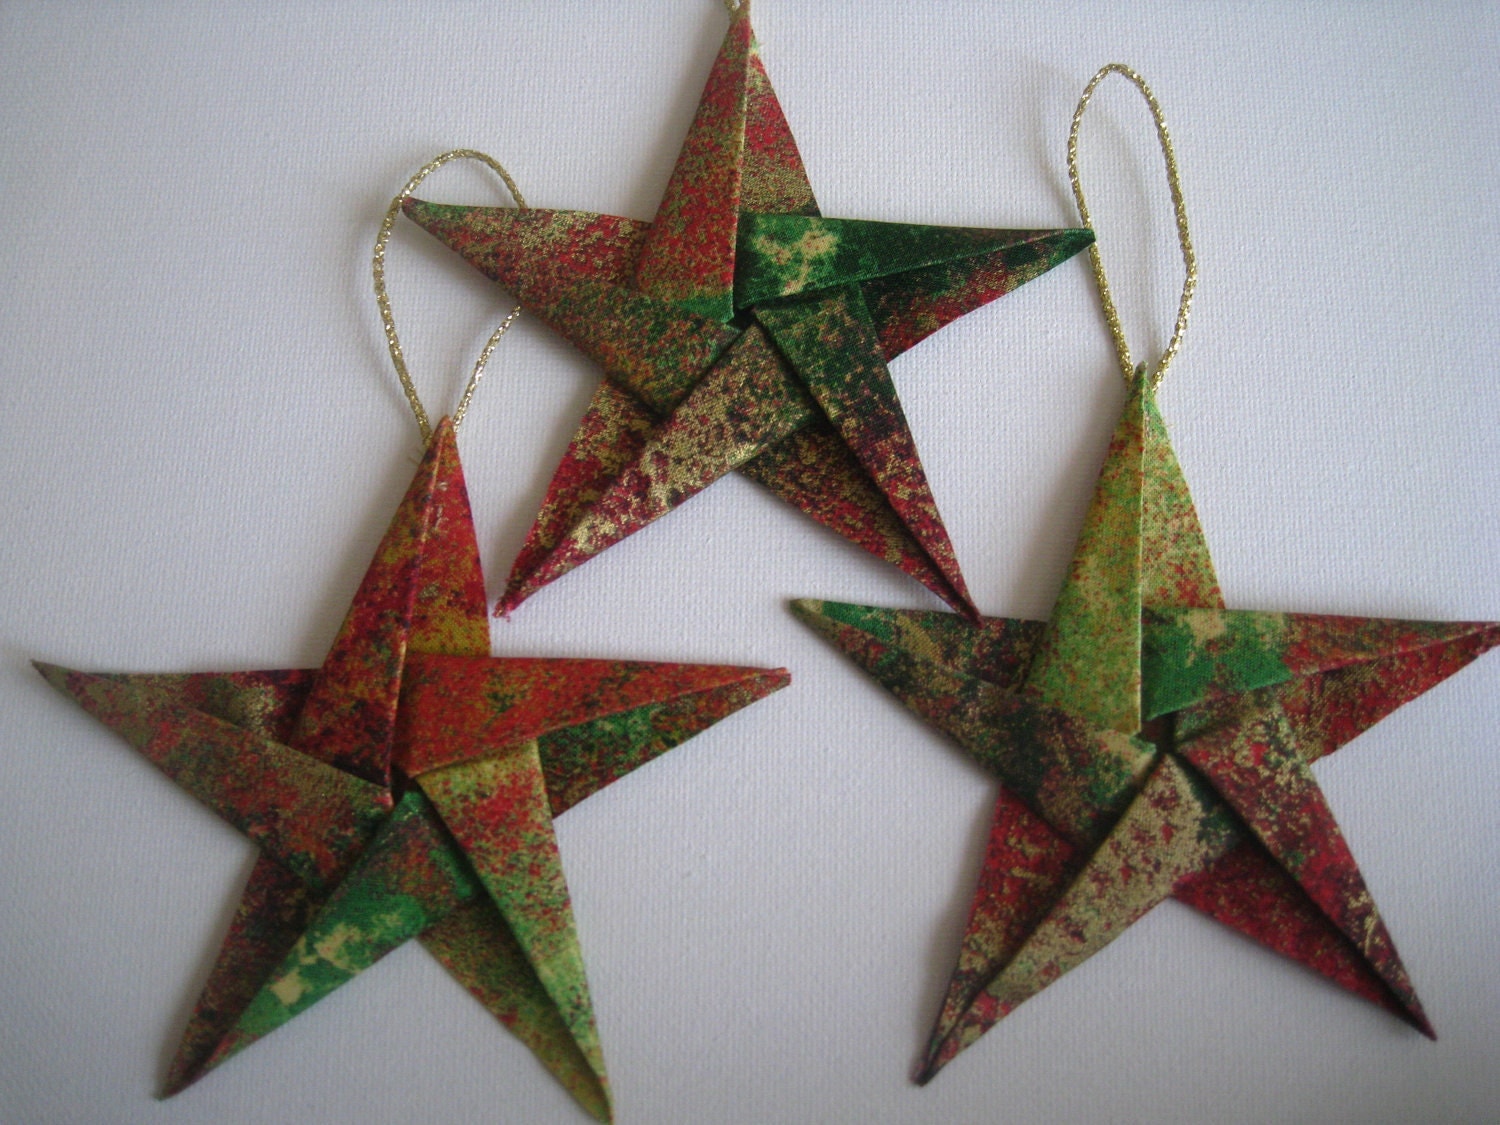 25 Best Pictures Origami Star Decorations - Folding 5 Pointed Origami Star Christmas Ornaments